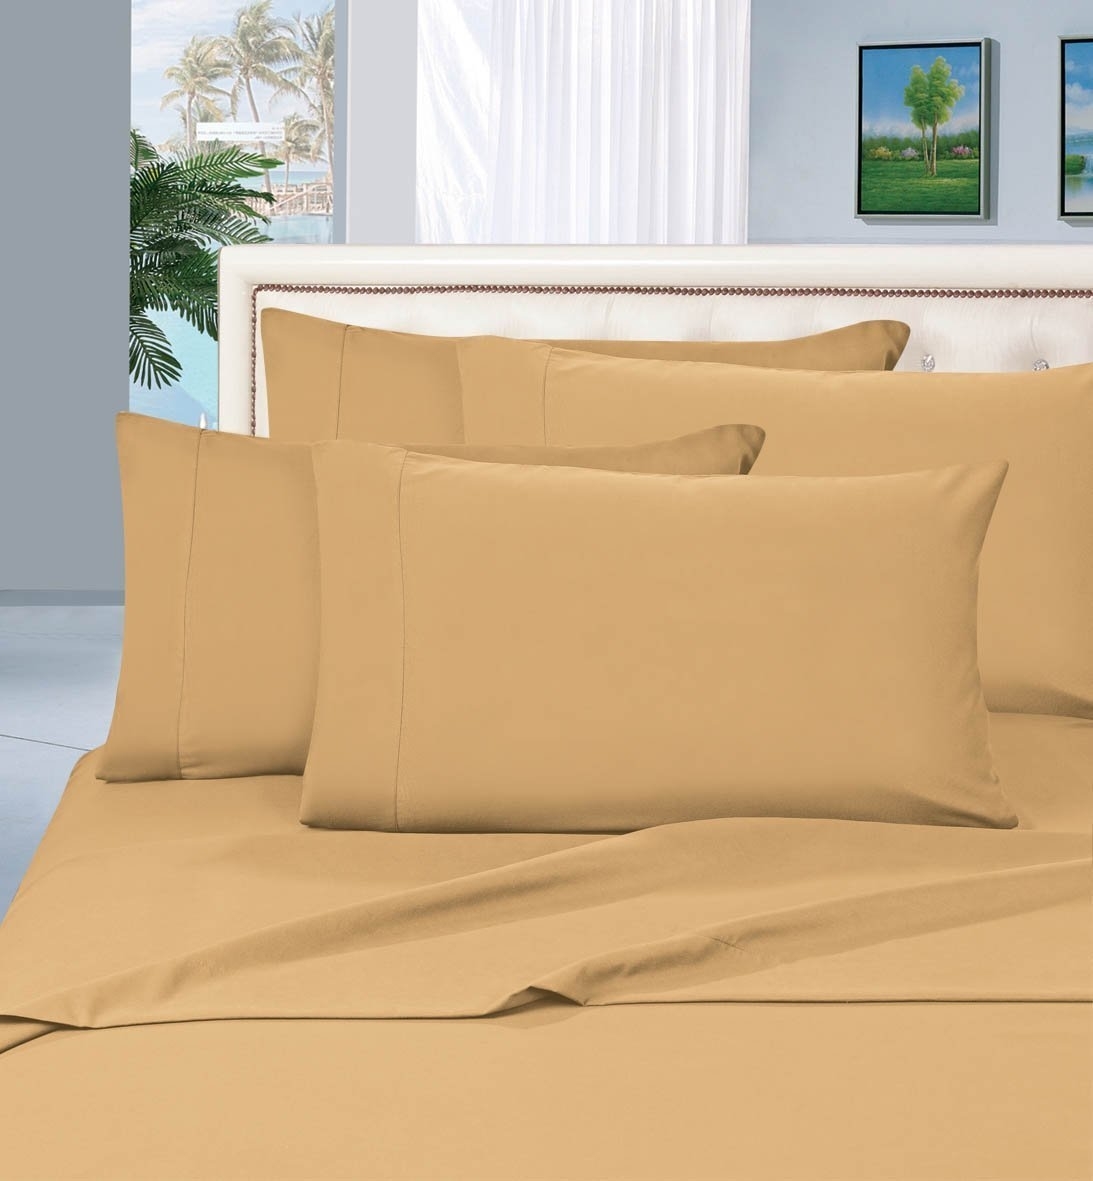 Elegant Comfort 1500 Series Wrinkle Resistant Egyptian Quality Hypoallergenic Ultra Soft Luxury 4-piece Bed Sheet Set, King, Camel-gold